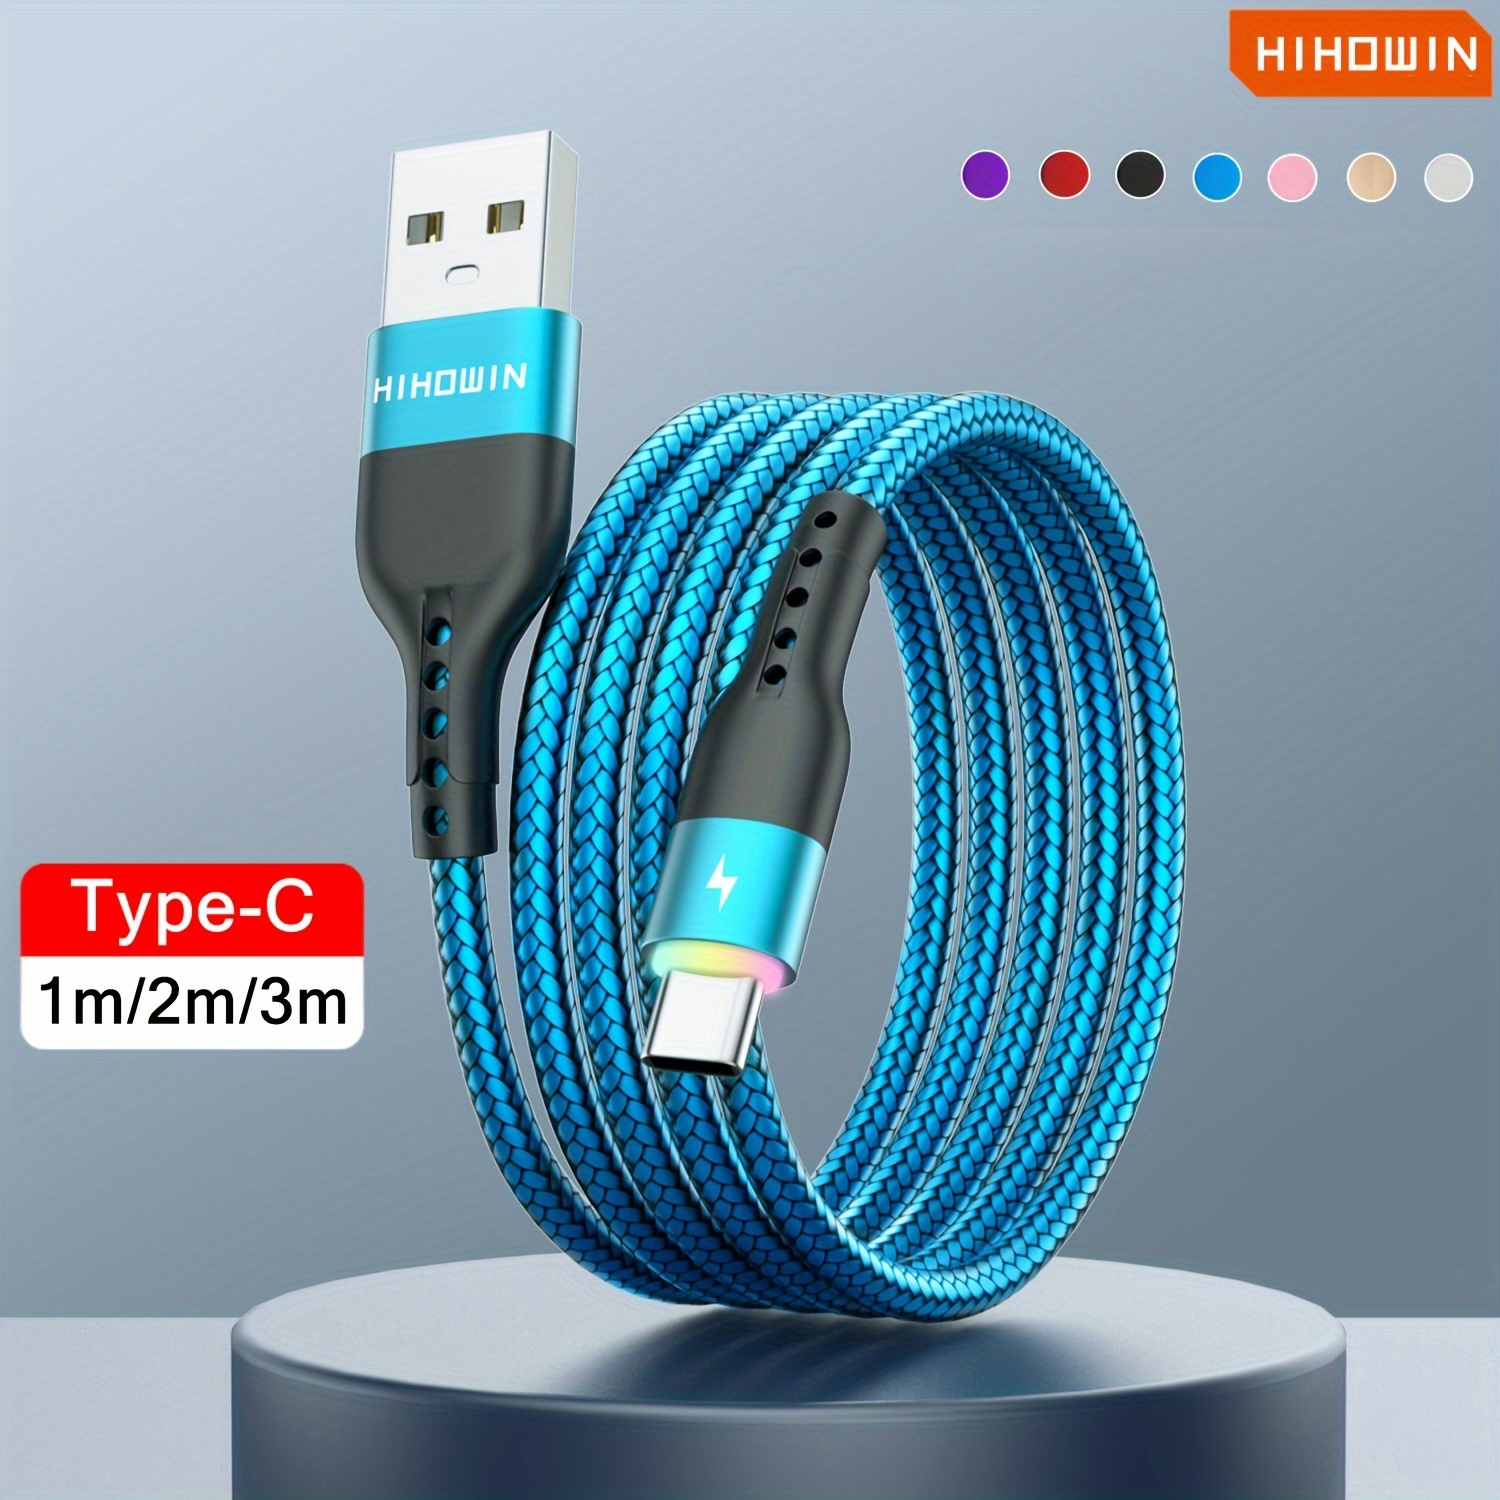 

Led Lighting Usb Type C Cable Fast Charging Charger Usb C Data Cable For Samsung Xiaomi Redmi Phone Wire Cord 1m/2m/3m